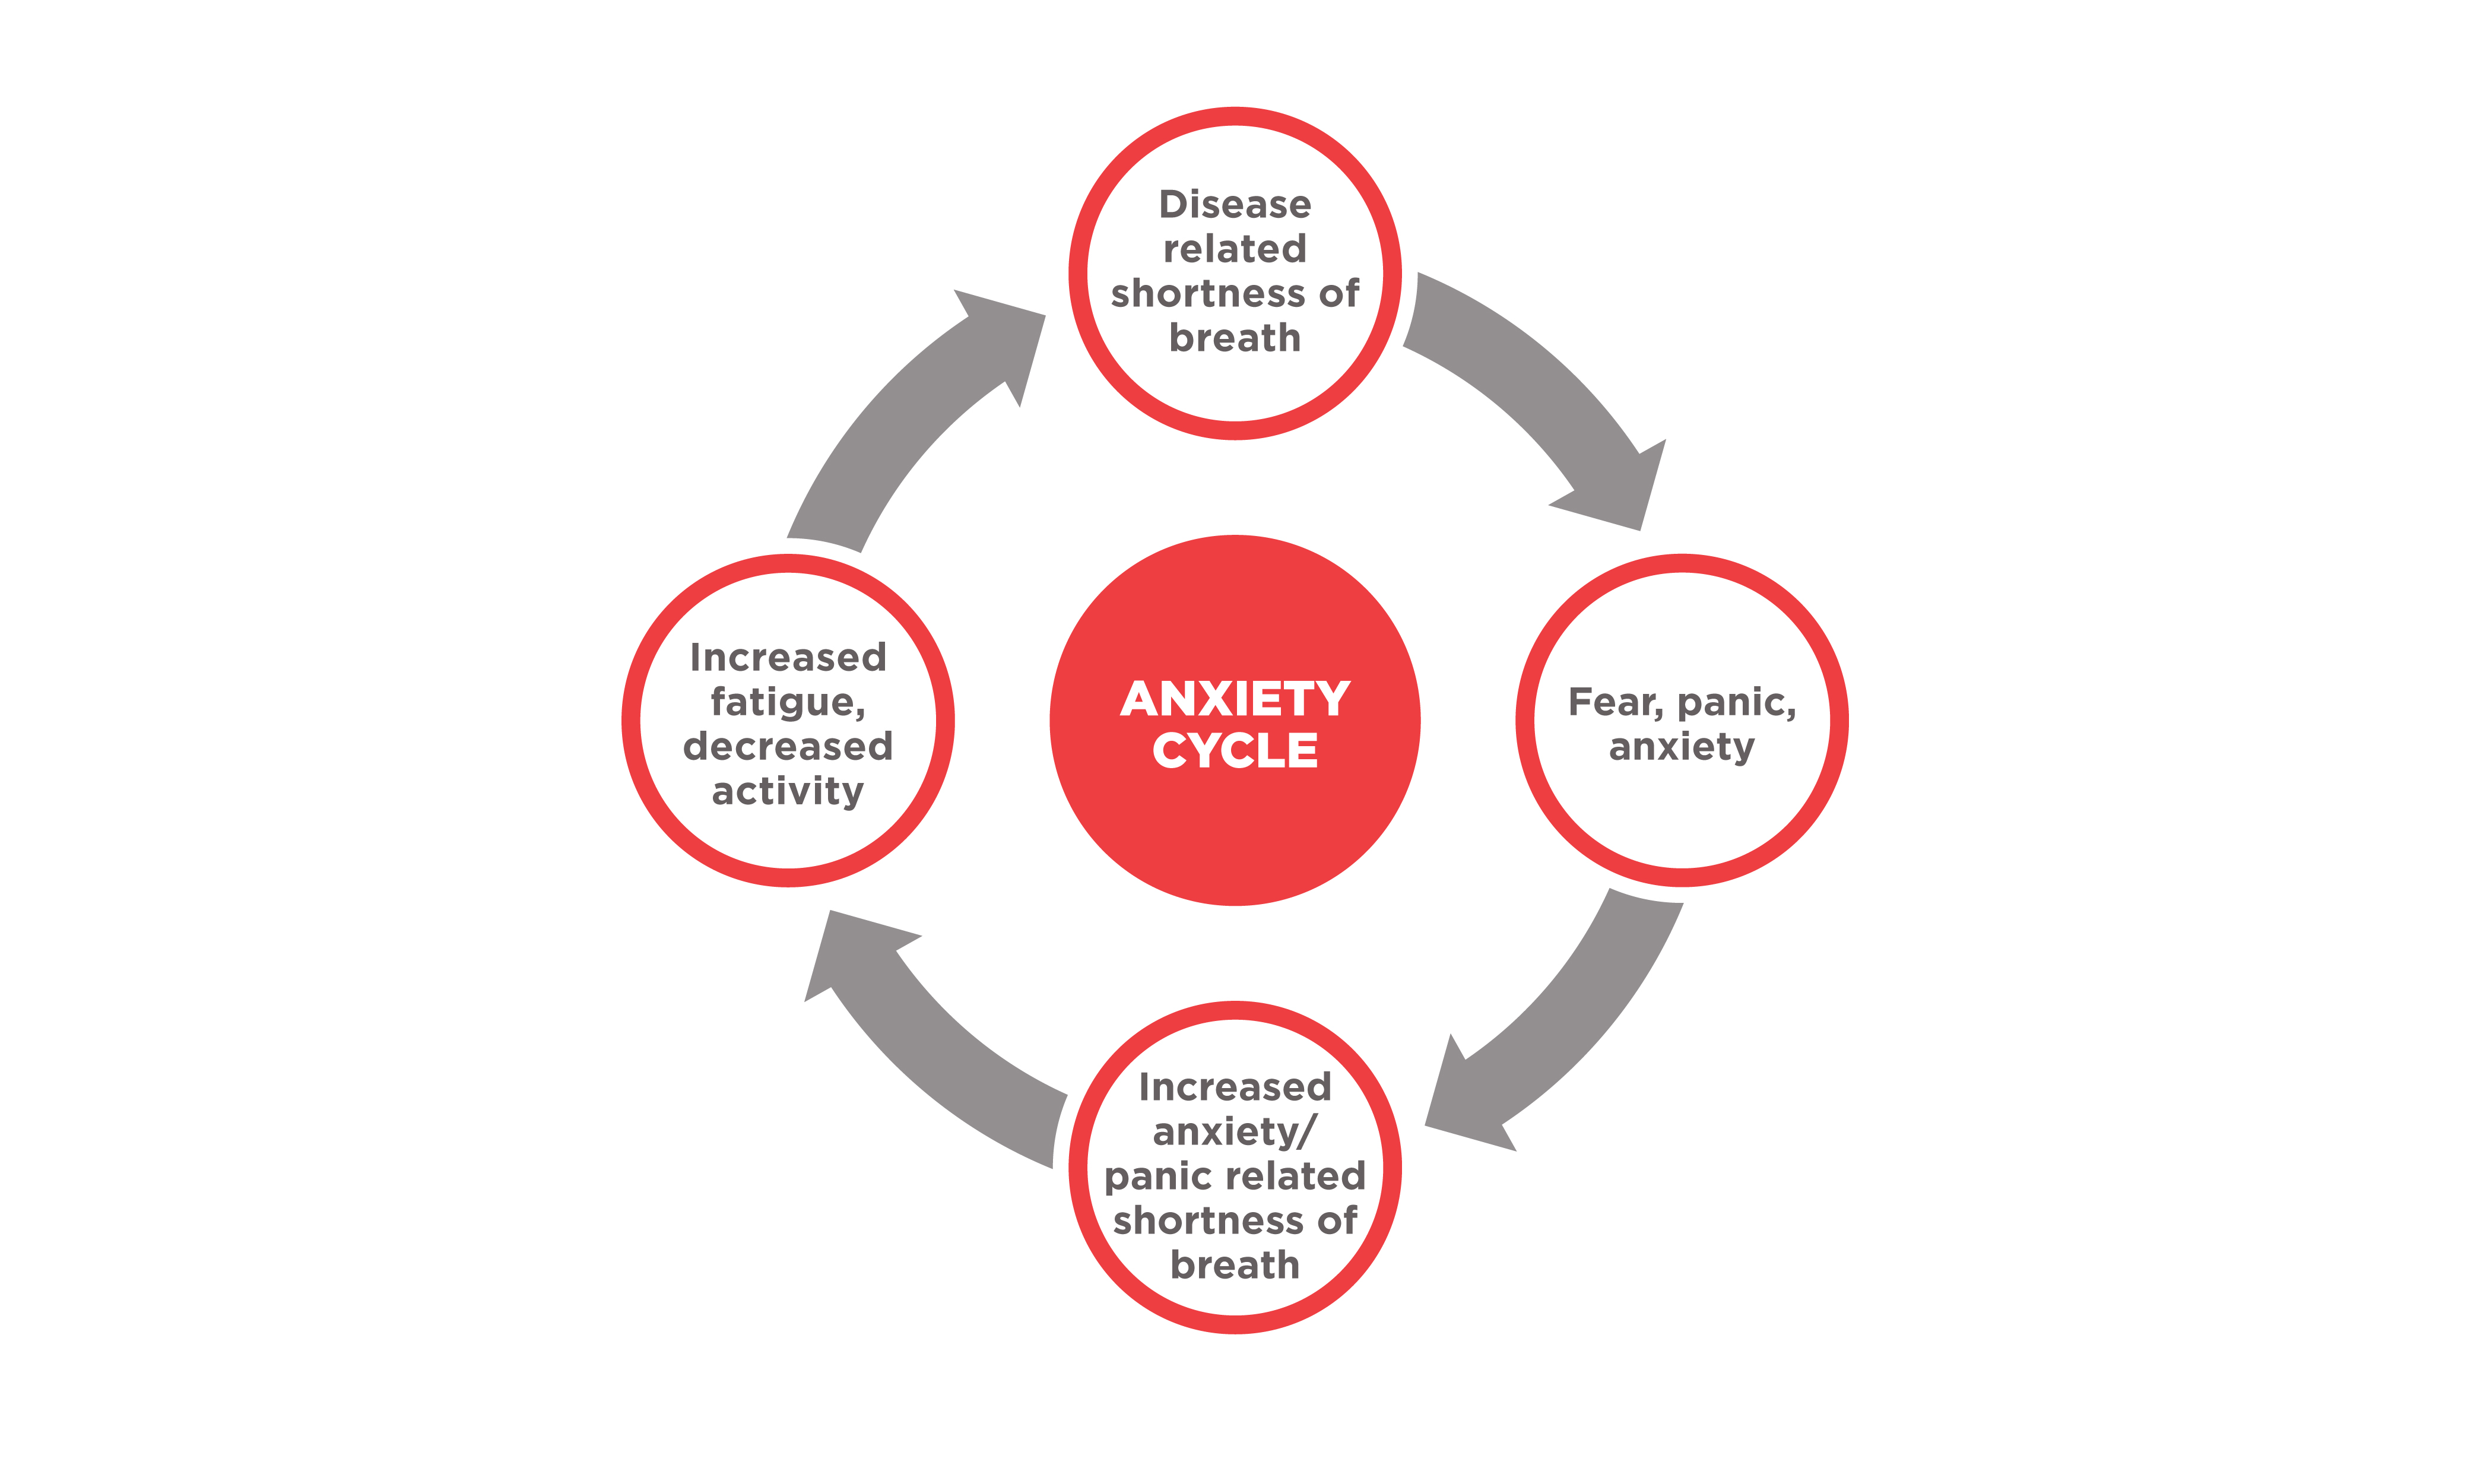 Anxiety cycle